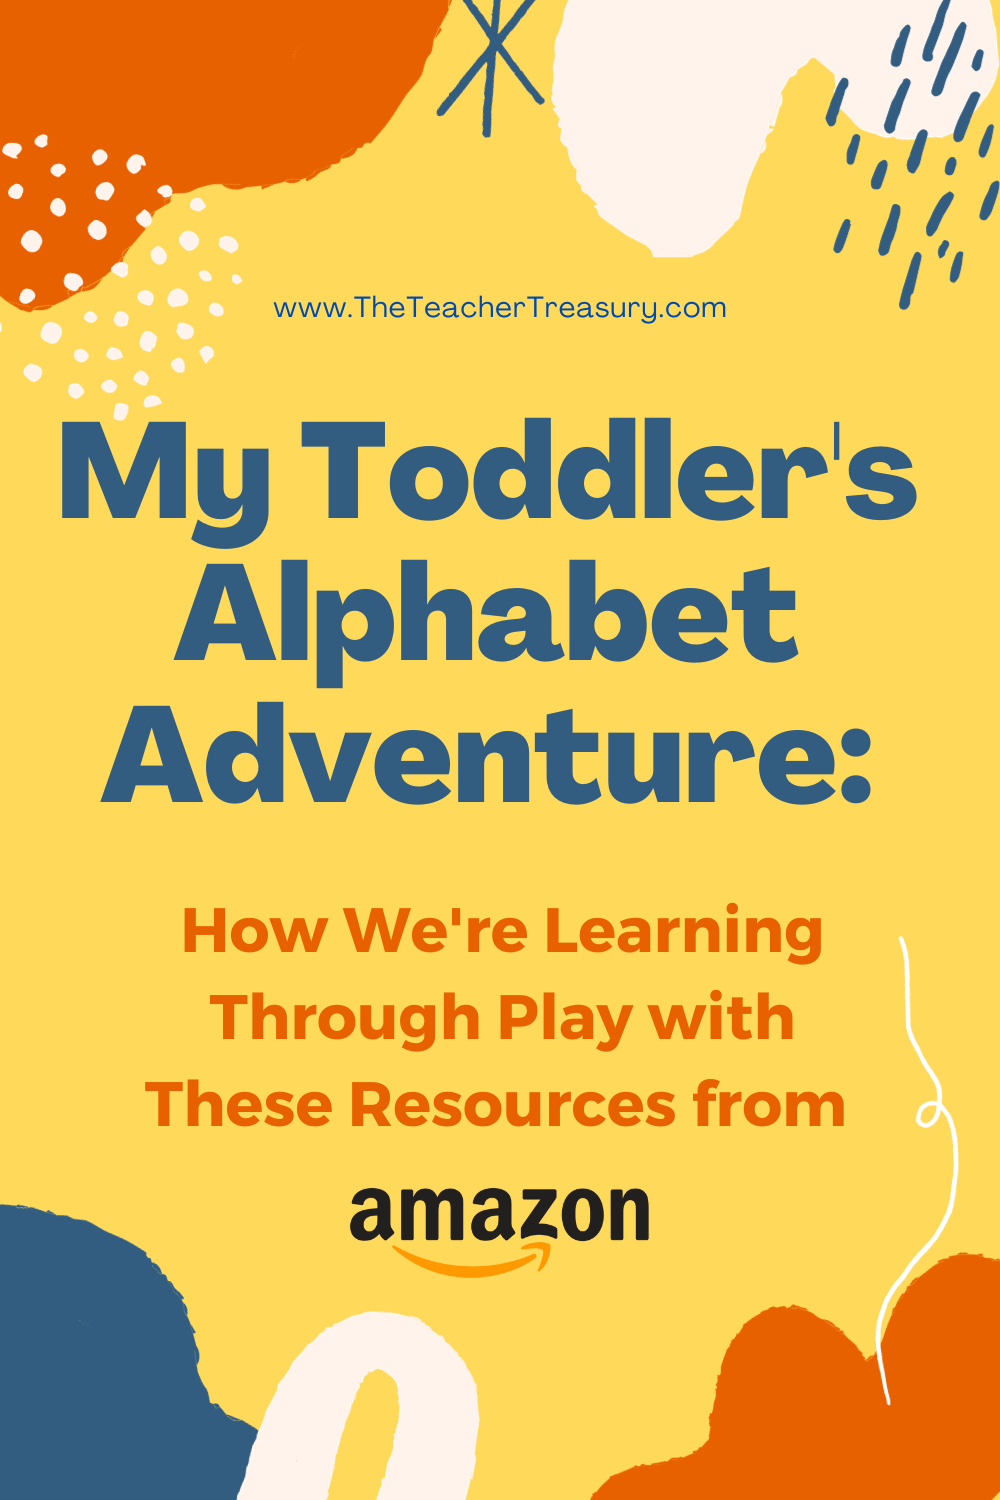 Learning Through Play with These Resources from Amazon